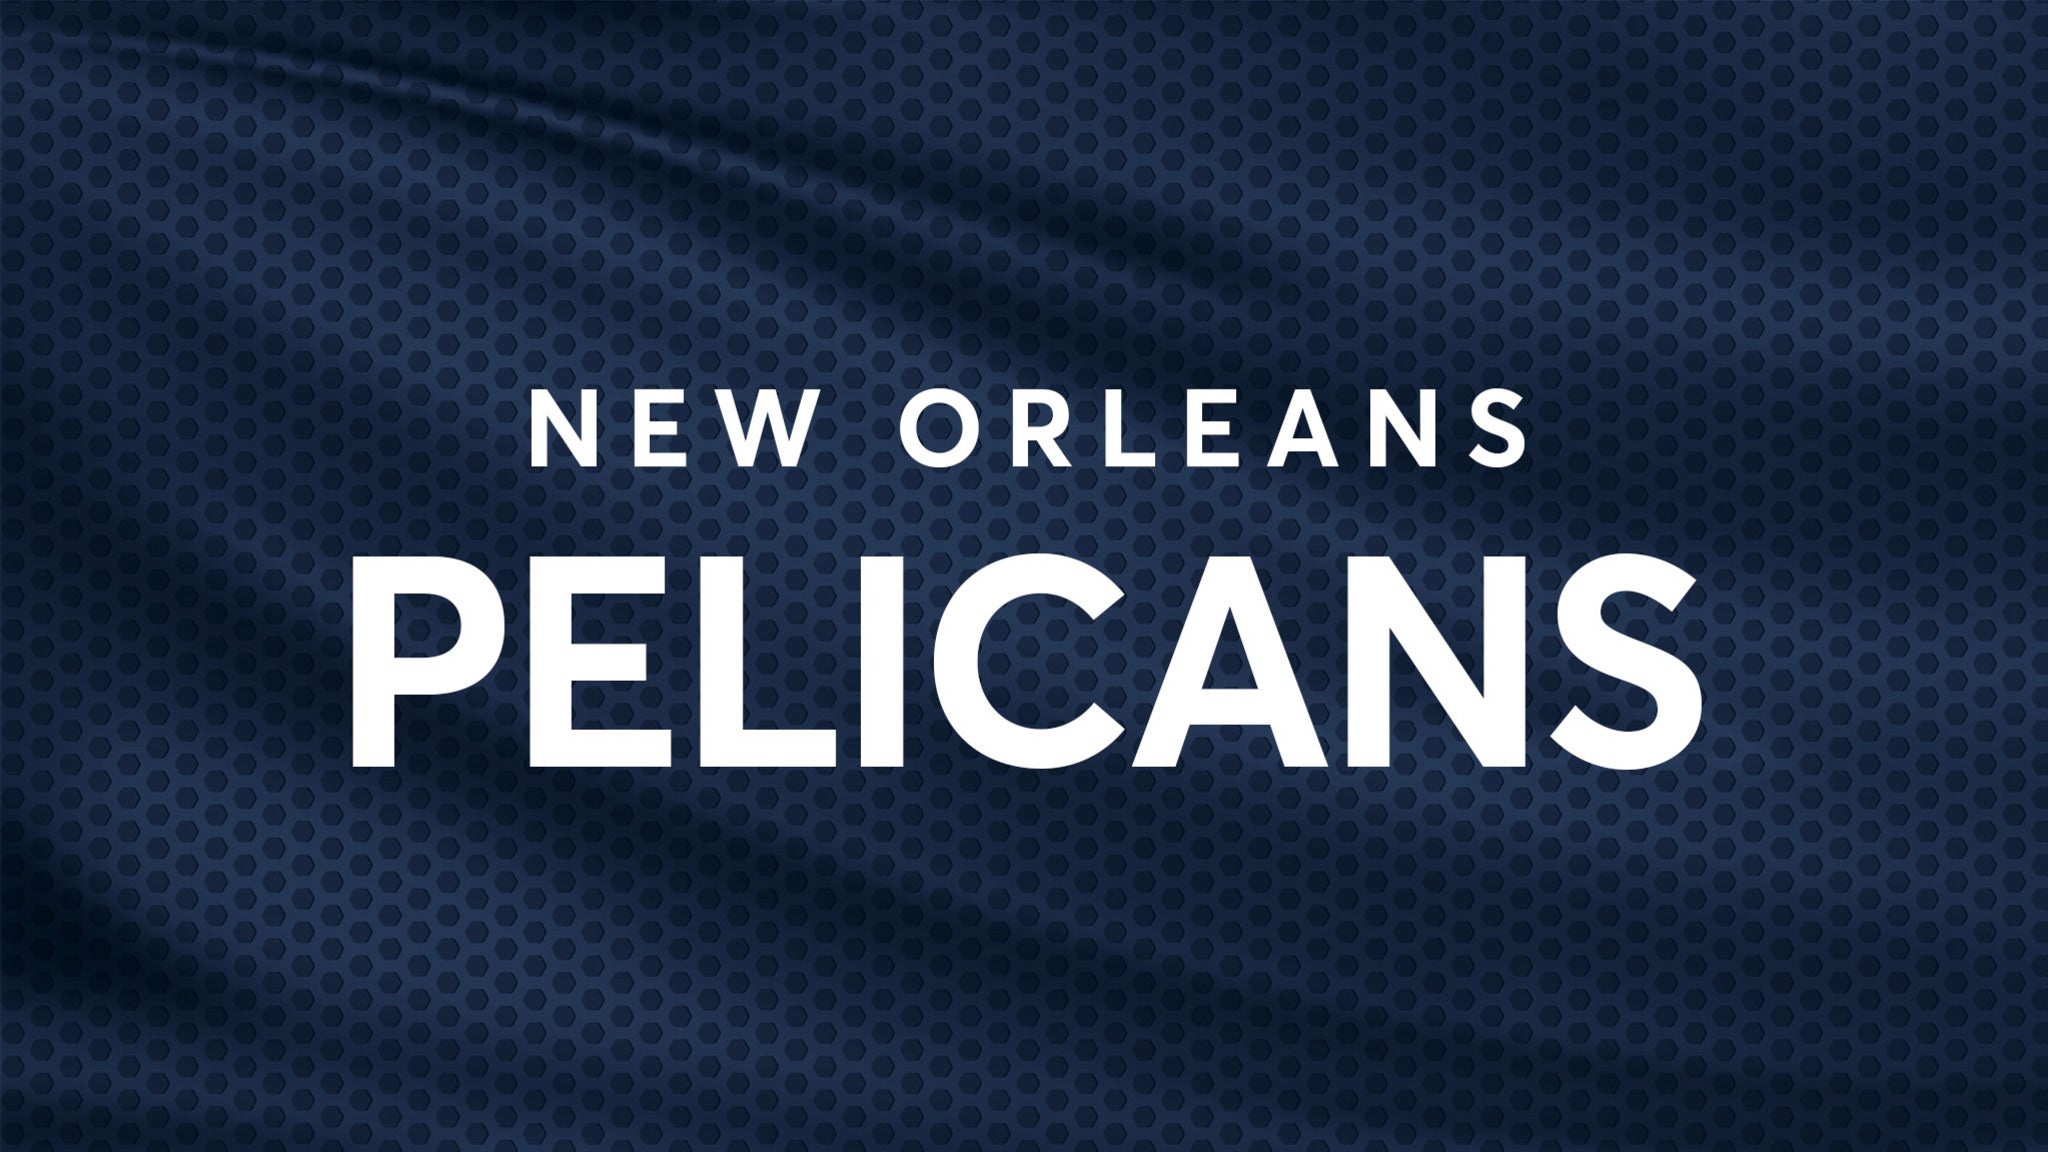 New Orleans Pelicans vs. Cleveland Cavaliers